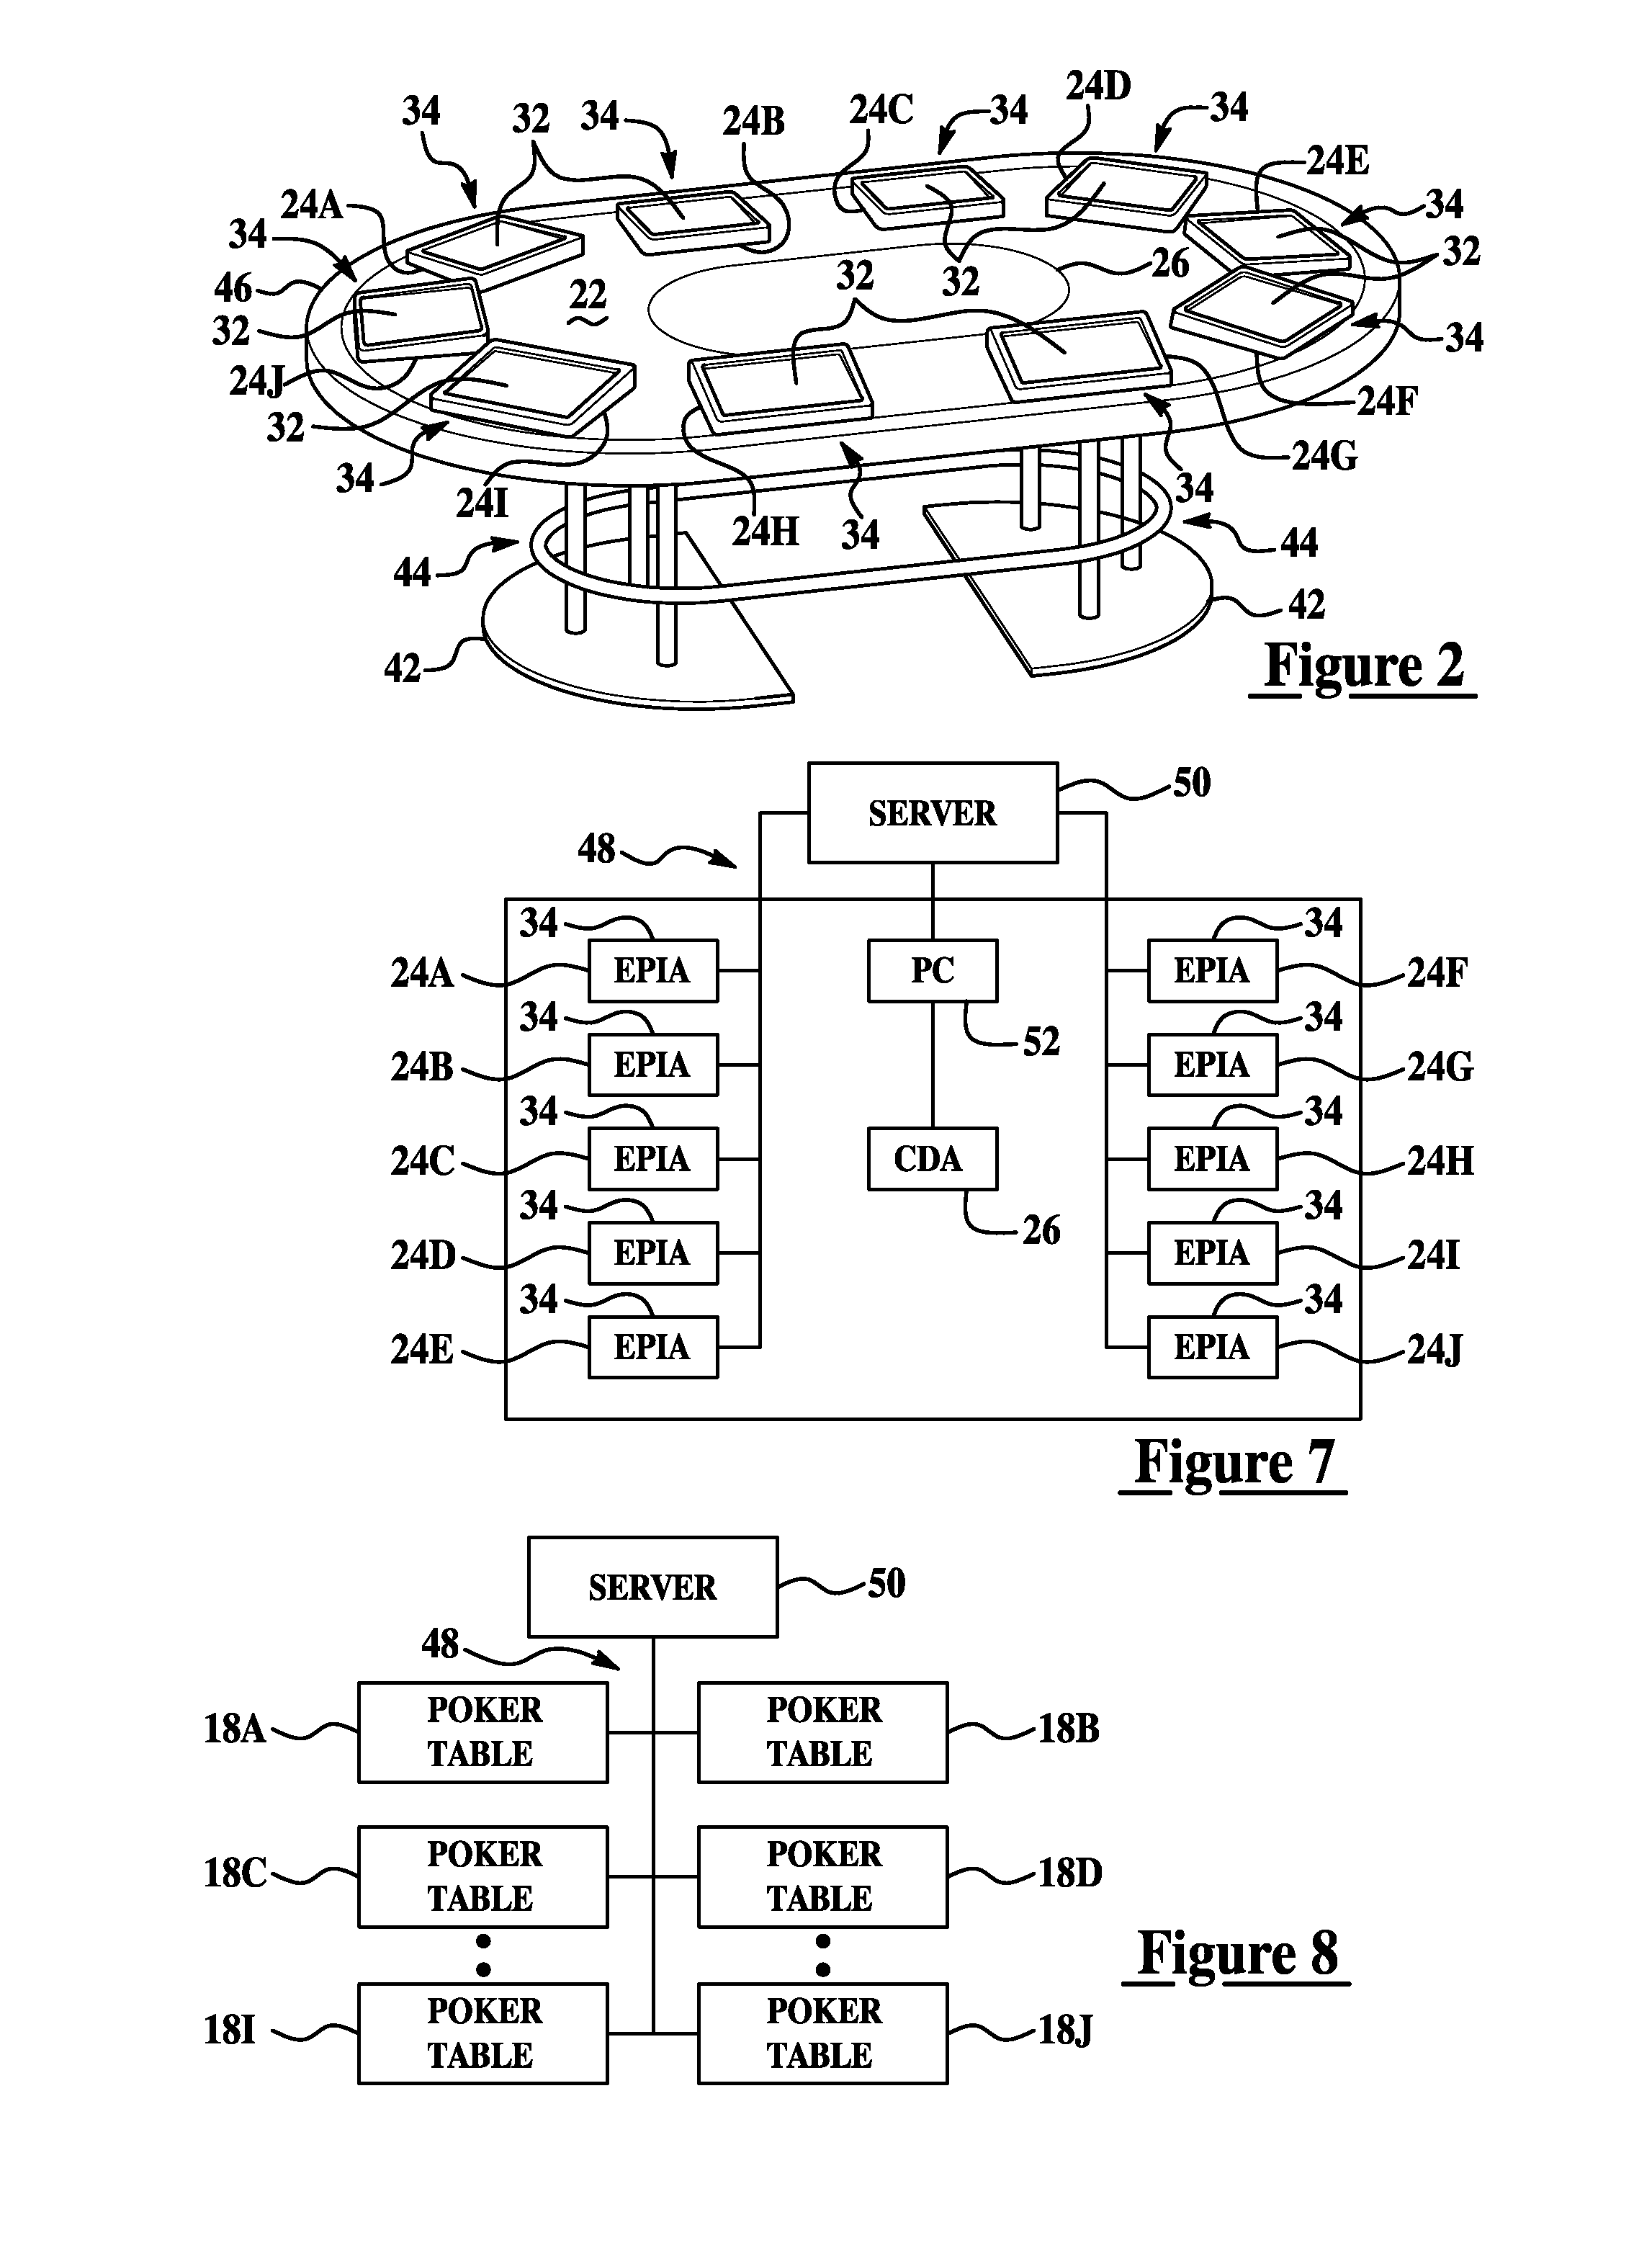 Administrator tool of an electronic gaming system and method of processing gaming profiles controlled by the system